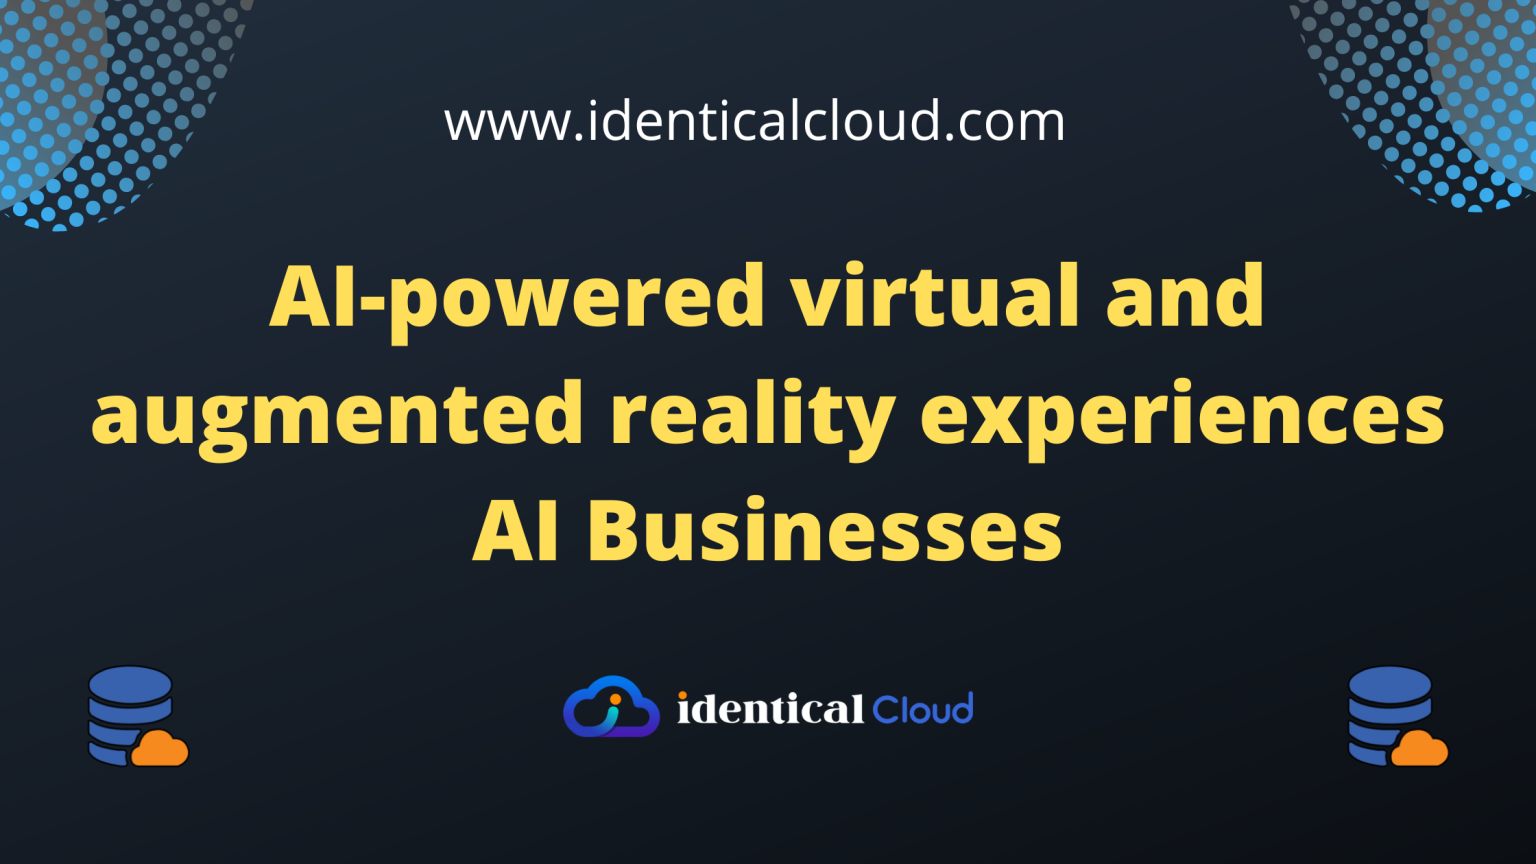 AI Powered Virtual And Augmented Reality Experiences AI Businesses Identicalcloud.com  1536x864 